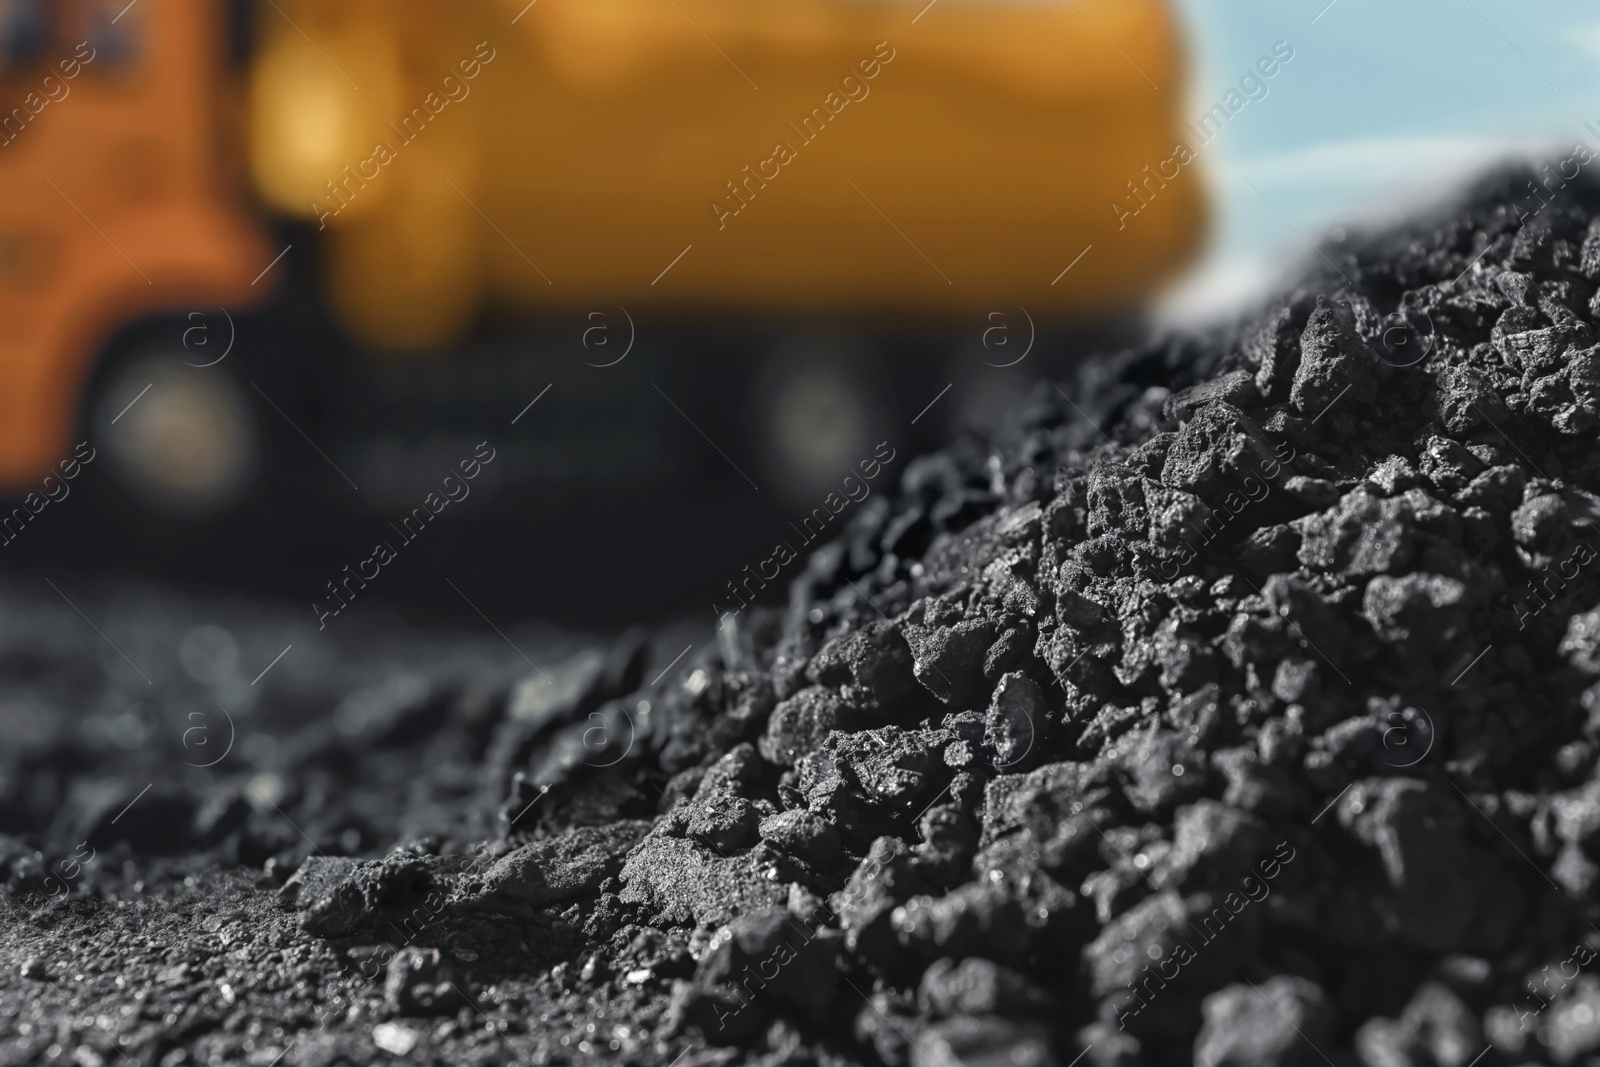 Image of Pile of coal and blurred yellow truck on background, closeup